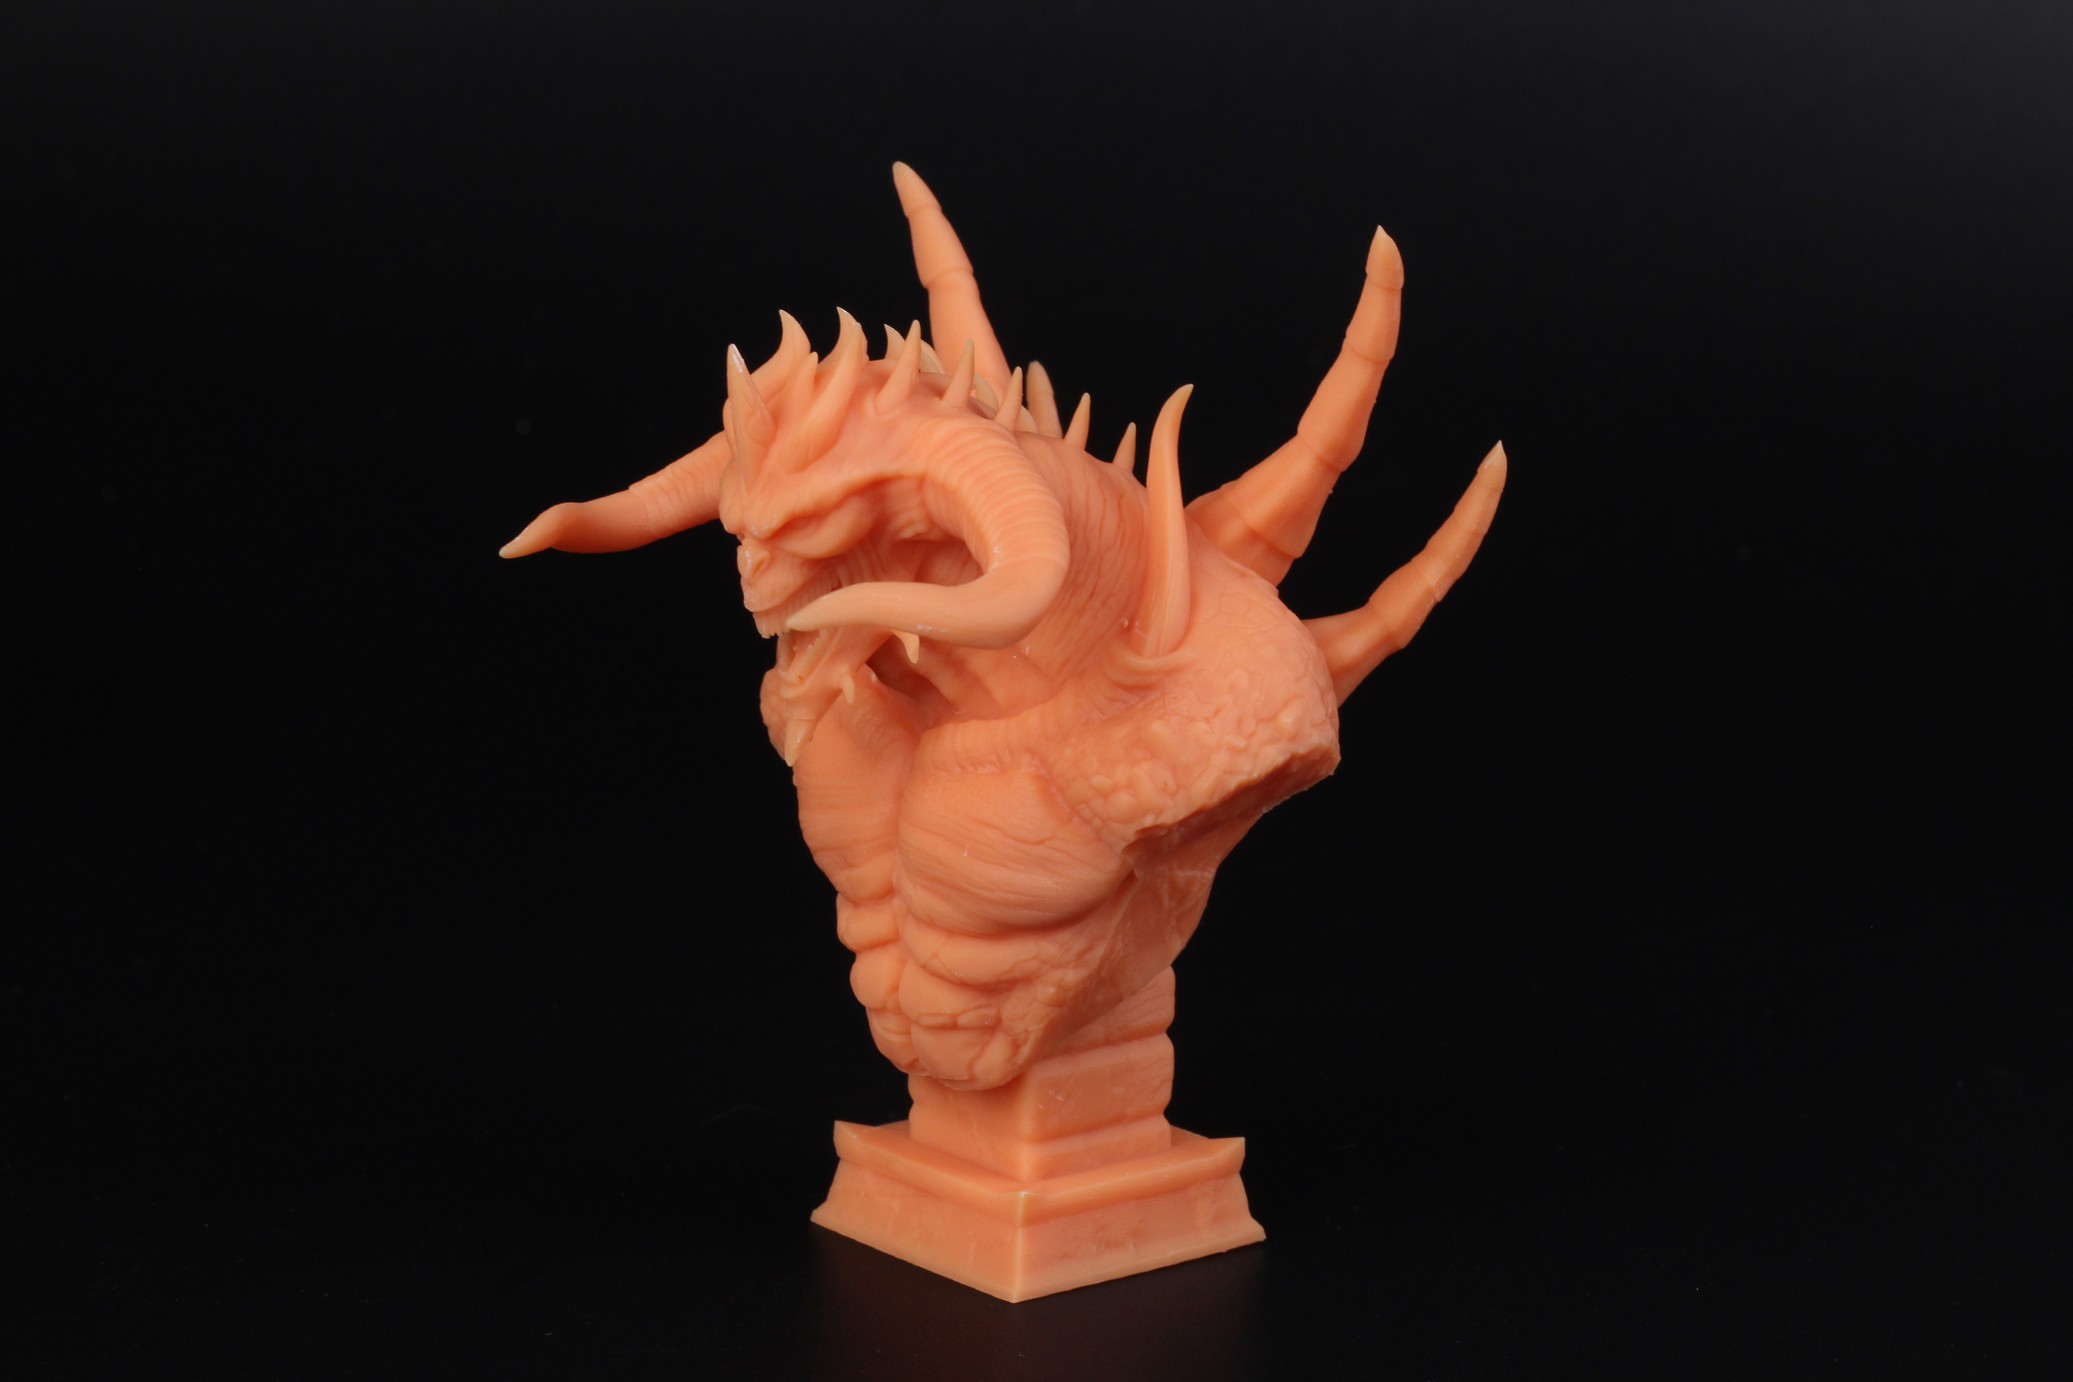 Diablo Bust printed on Anycubic Photon M3 Max 2 | Anycubic Photon M3 Max Review: Who Needs FDM Anymore?